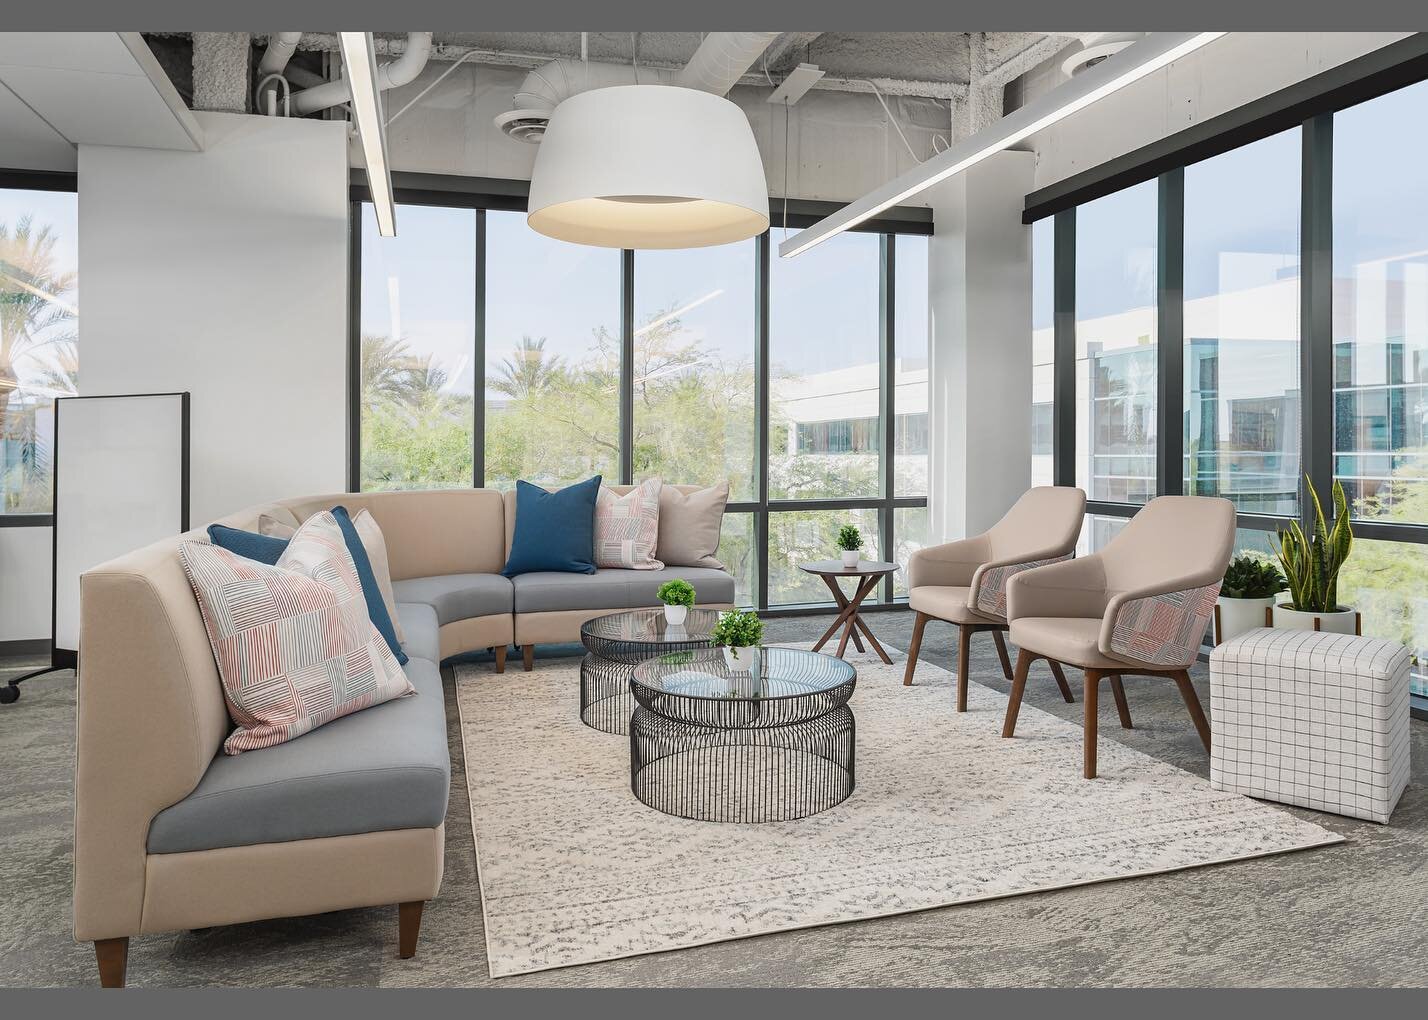 Look at this open, airy and gorgeous office for @symmetrysoftware, featuring some of our favorite products!
 
Image 1: @ofs Coact lounge, Kasura chairs, Boost ottoman &amp; Beck end table
Image 2: @ofs Rowen lounge &amp; bench, Kosa coffee tables
Ima